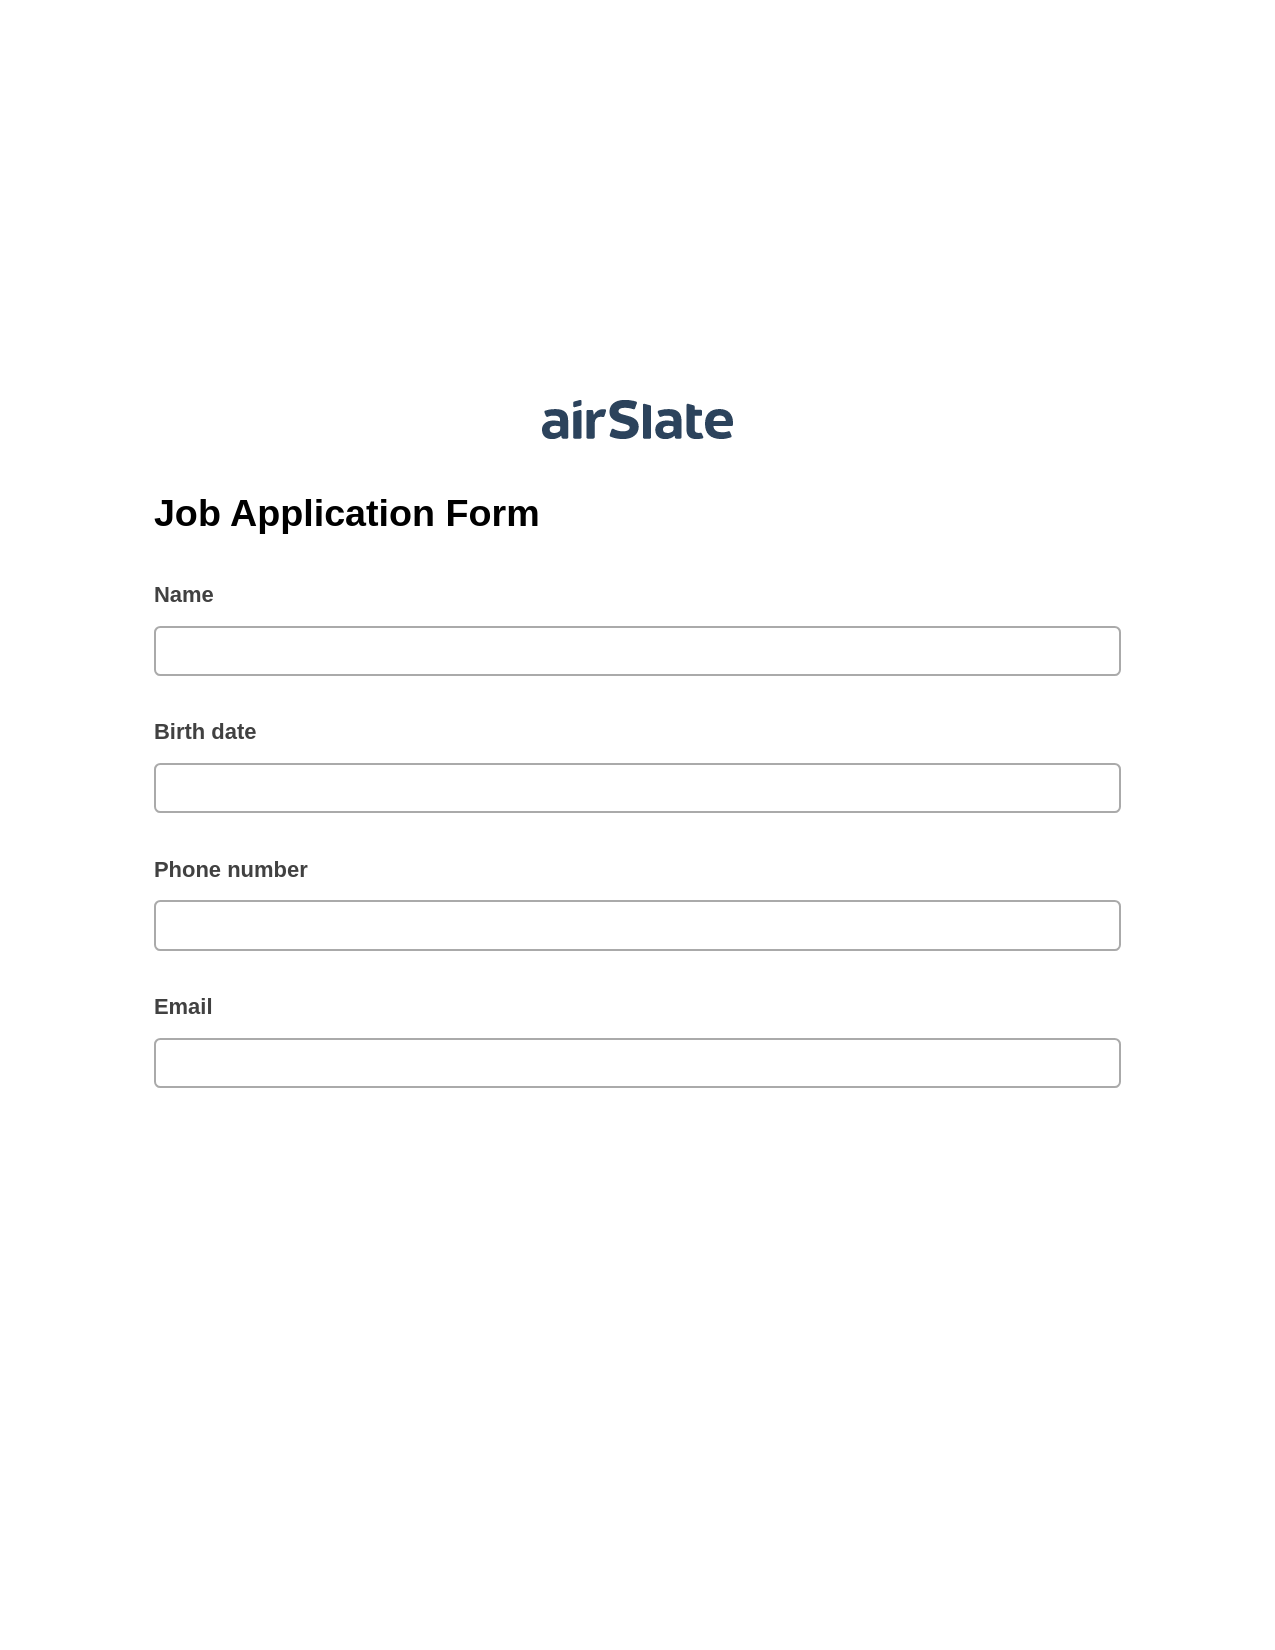 Job Application Form Pre-fill from Google Sheets Bot, Unassign Role Bot, Box Bot